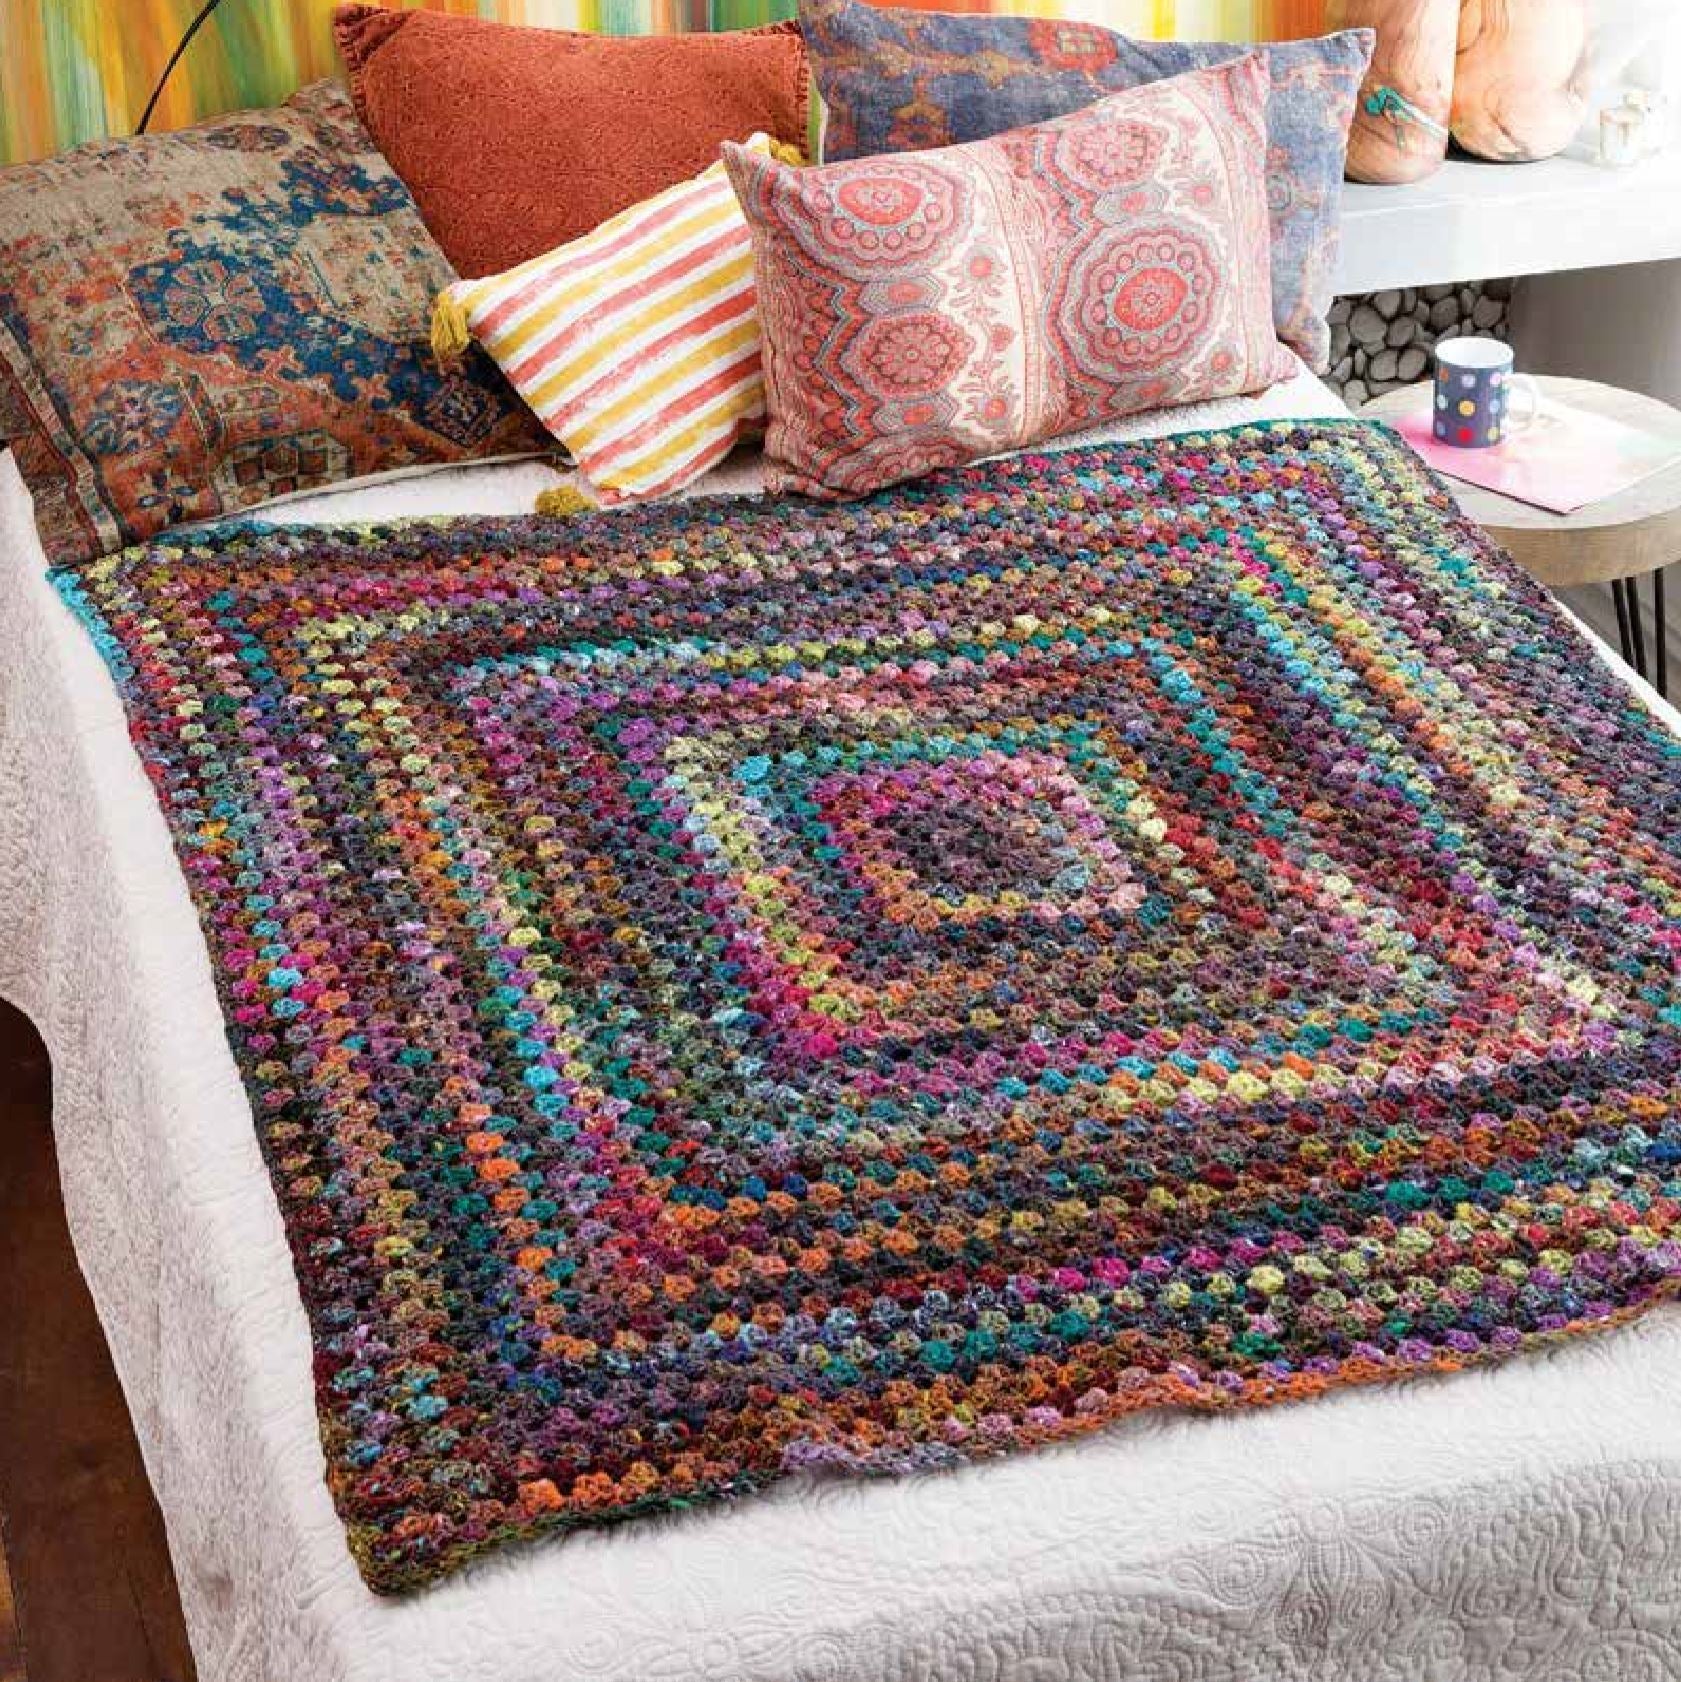 Big Granny Afghan Crochet Pattern by Noro Noro